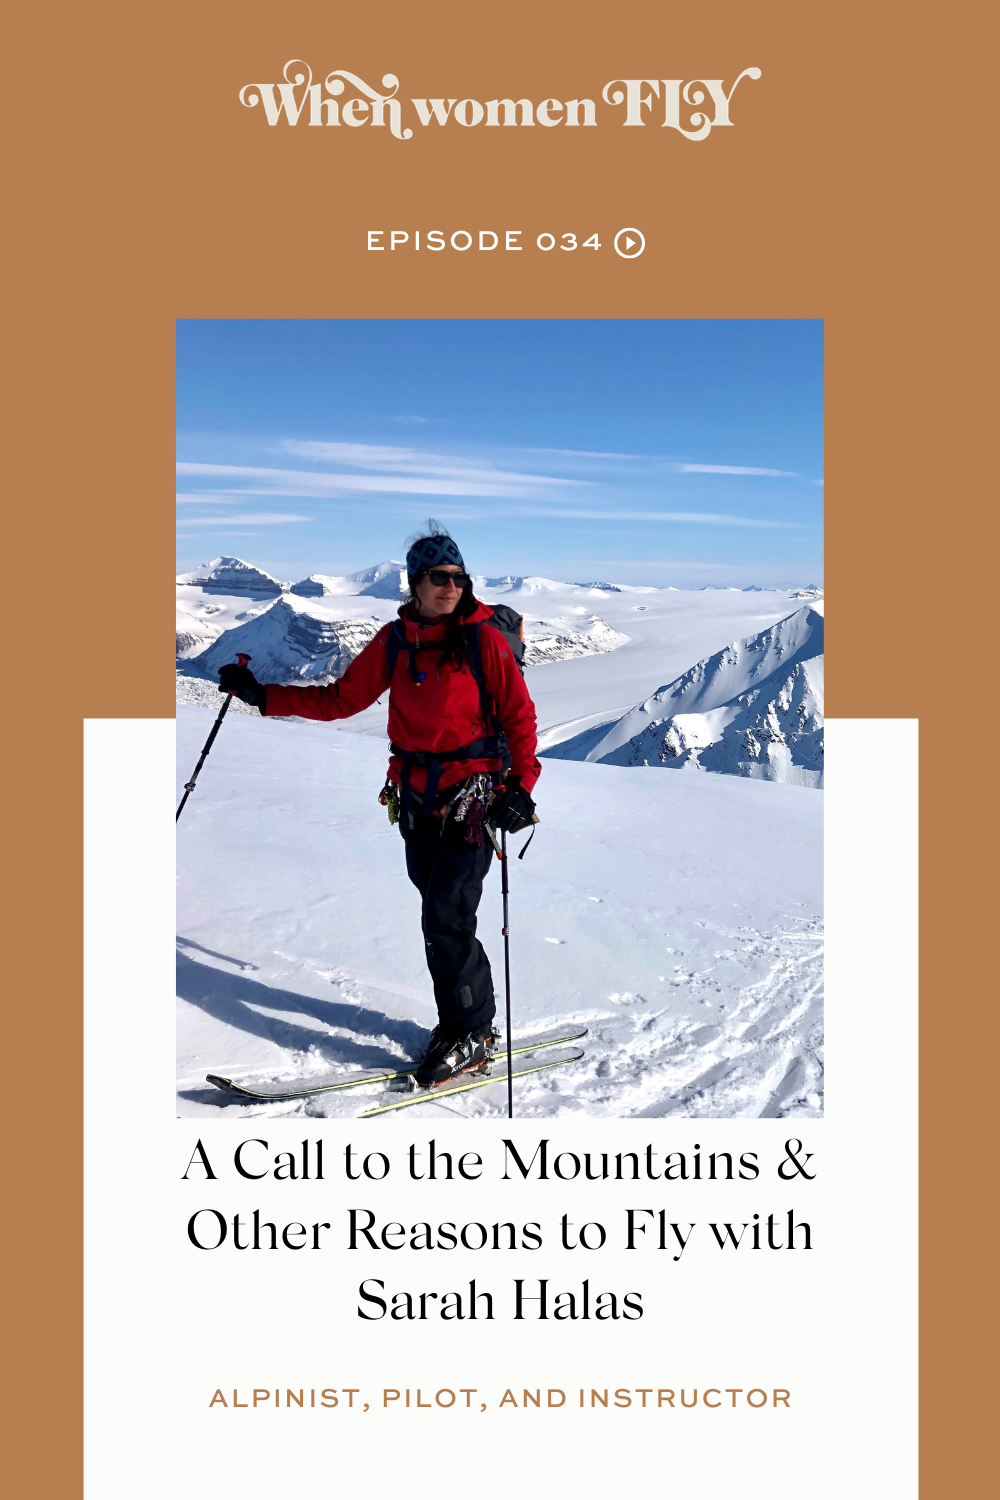 A Call to the Mountains and Other Reasons to Fly with Sarah Halas - Alpinist, Pilot, and Instructor via When Women Fly